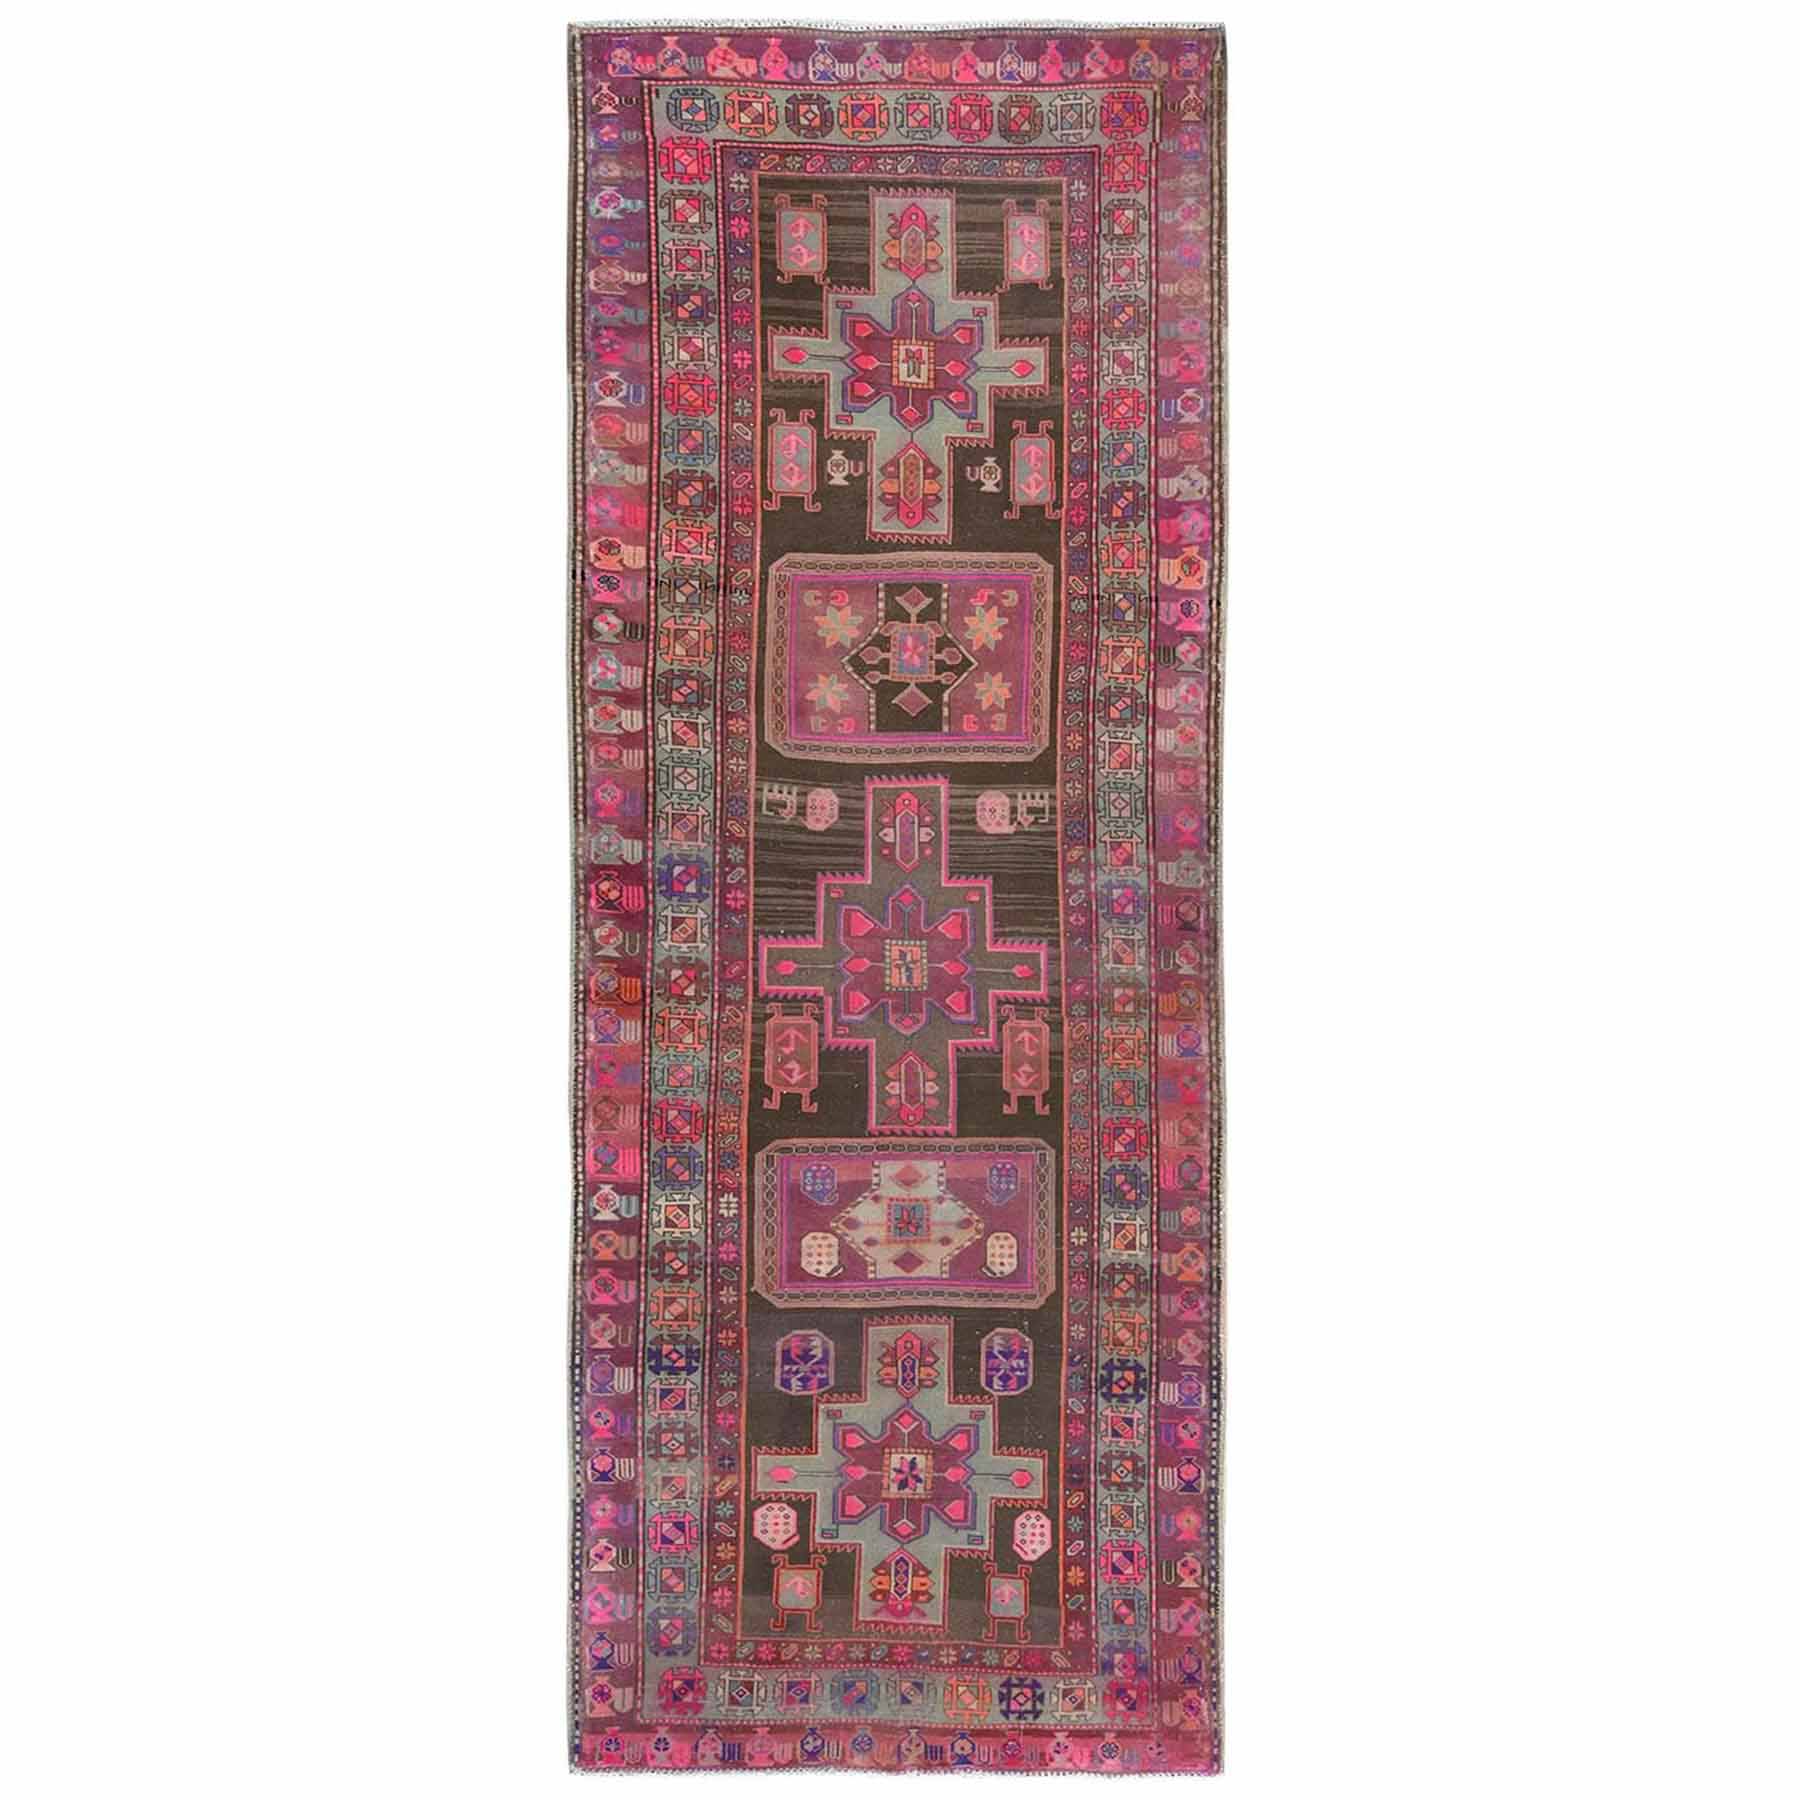 Overdyed-Vintage-Hand-Knotted-Rug-409310